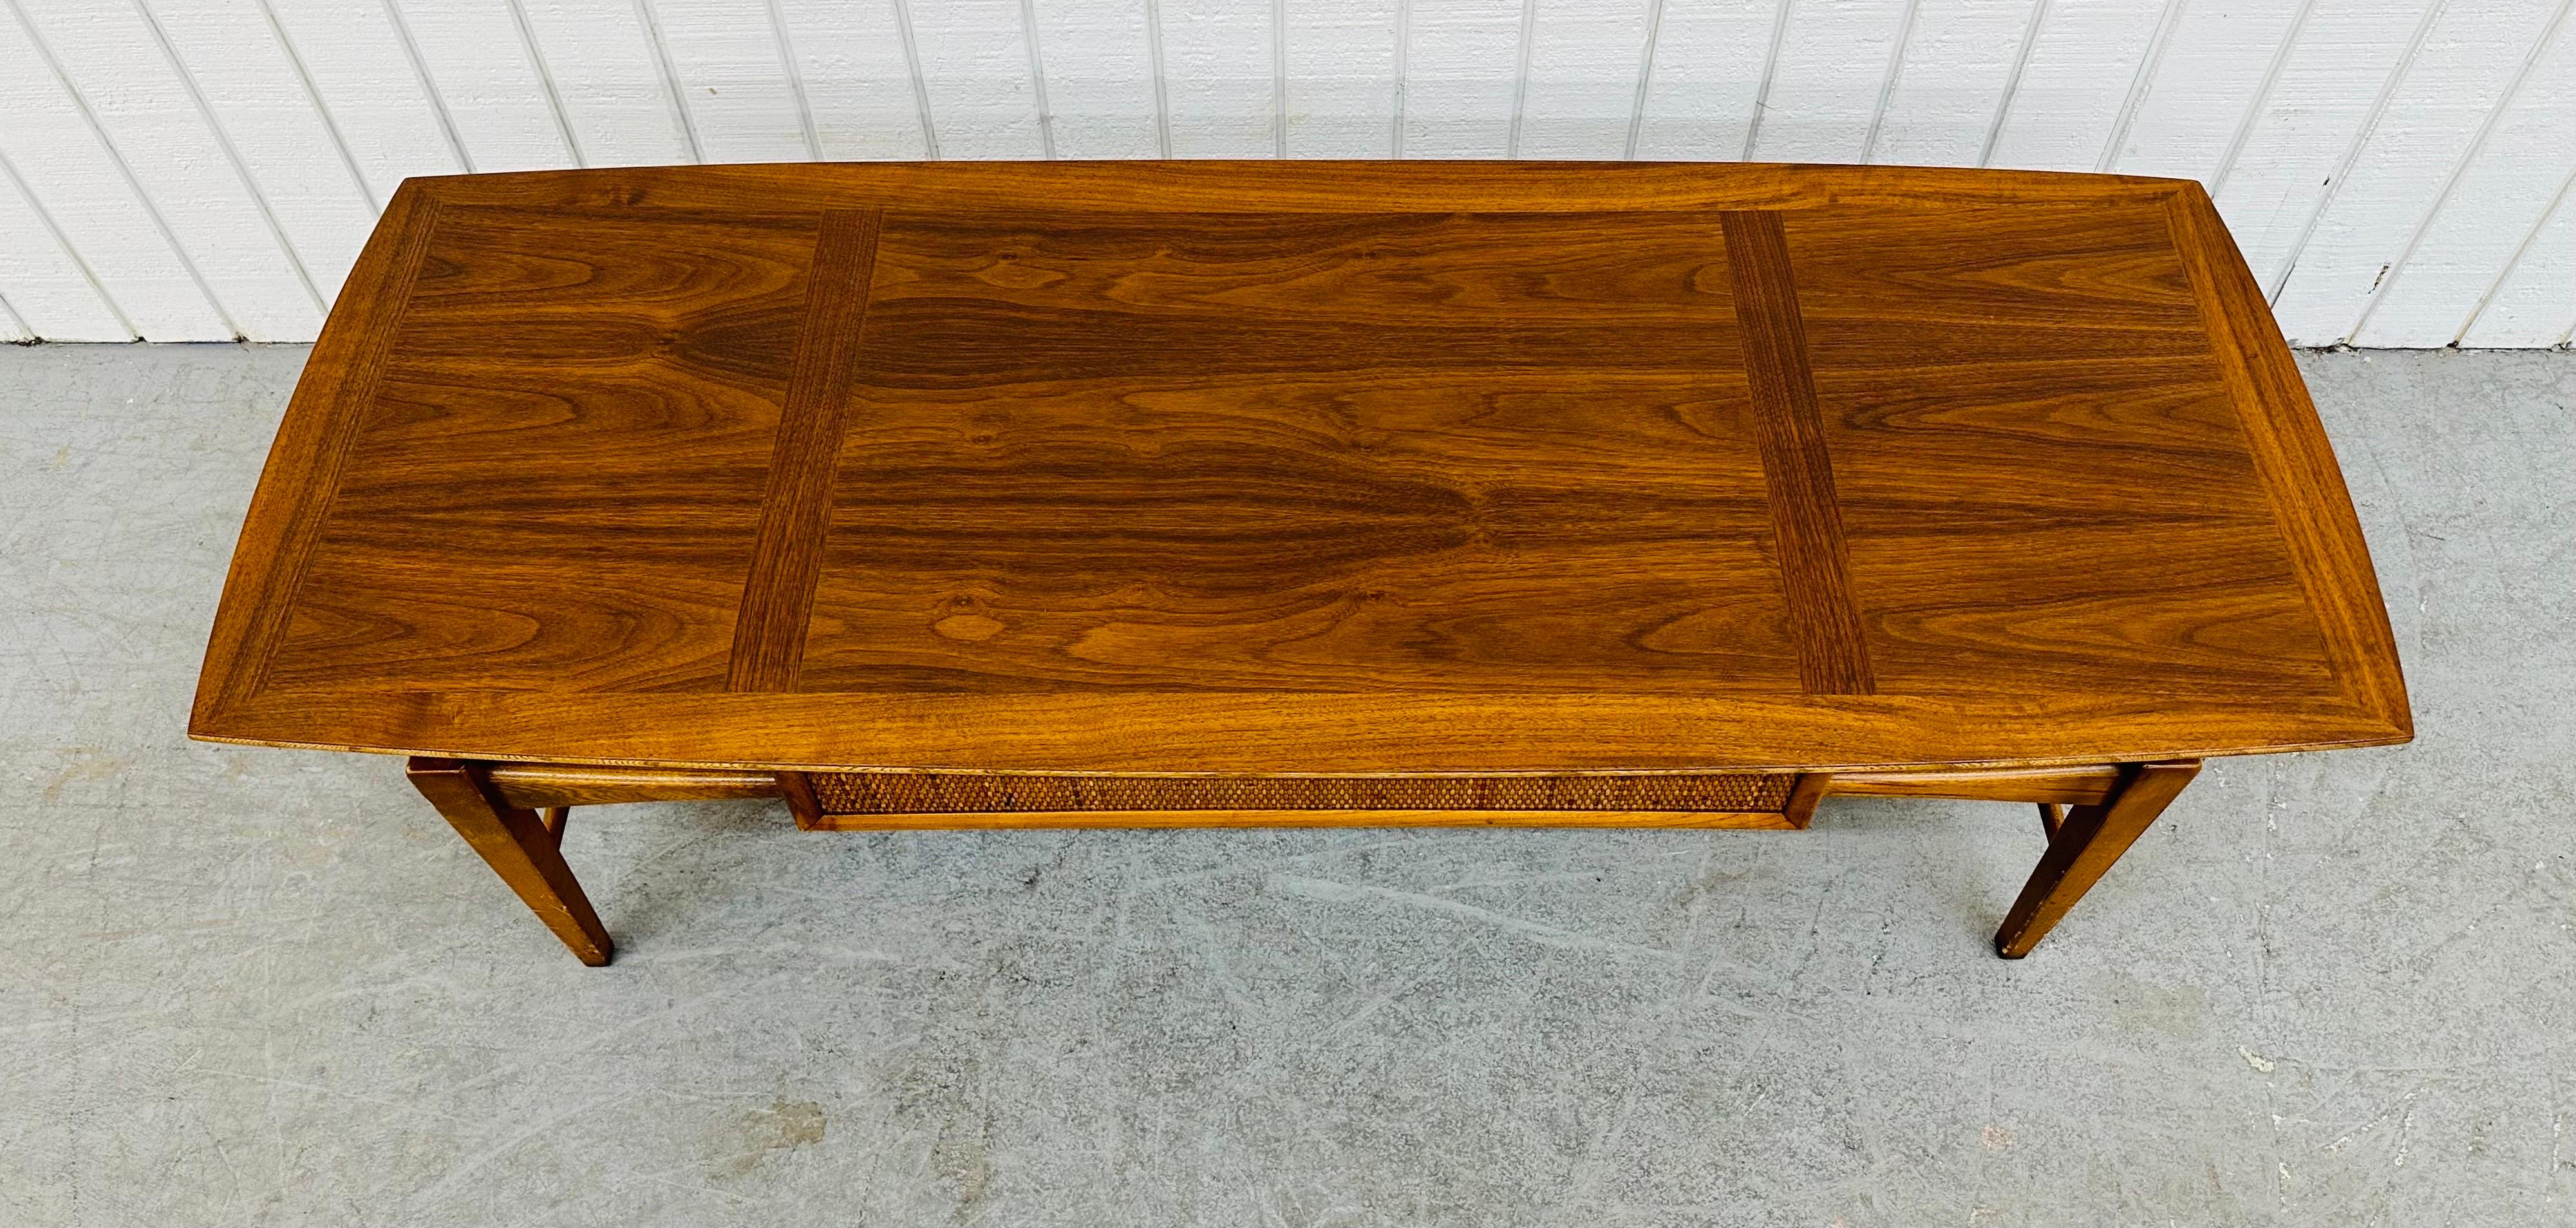 This listing is for a Mid-Century Modern Lane Walnut Coffee Table. Featuring a straight line design, freeform wooden base, cane front drawer, and a beautiful walnut finish. This is an exceptional combination of quality and design by Lane!